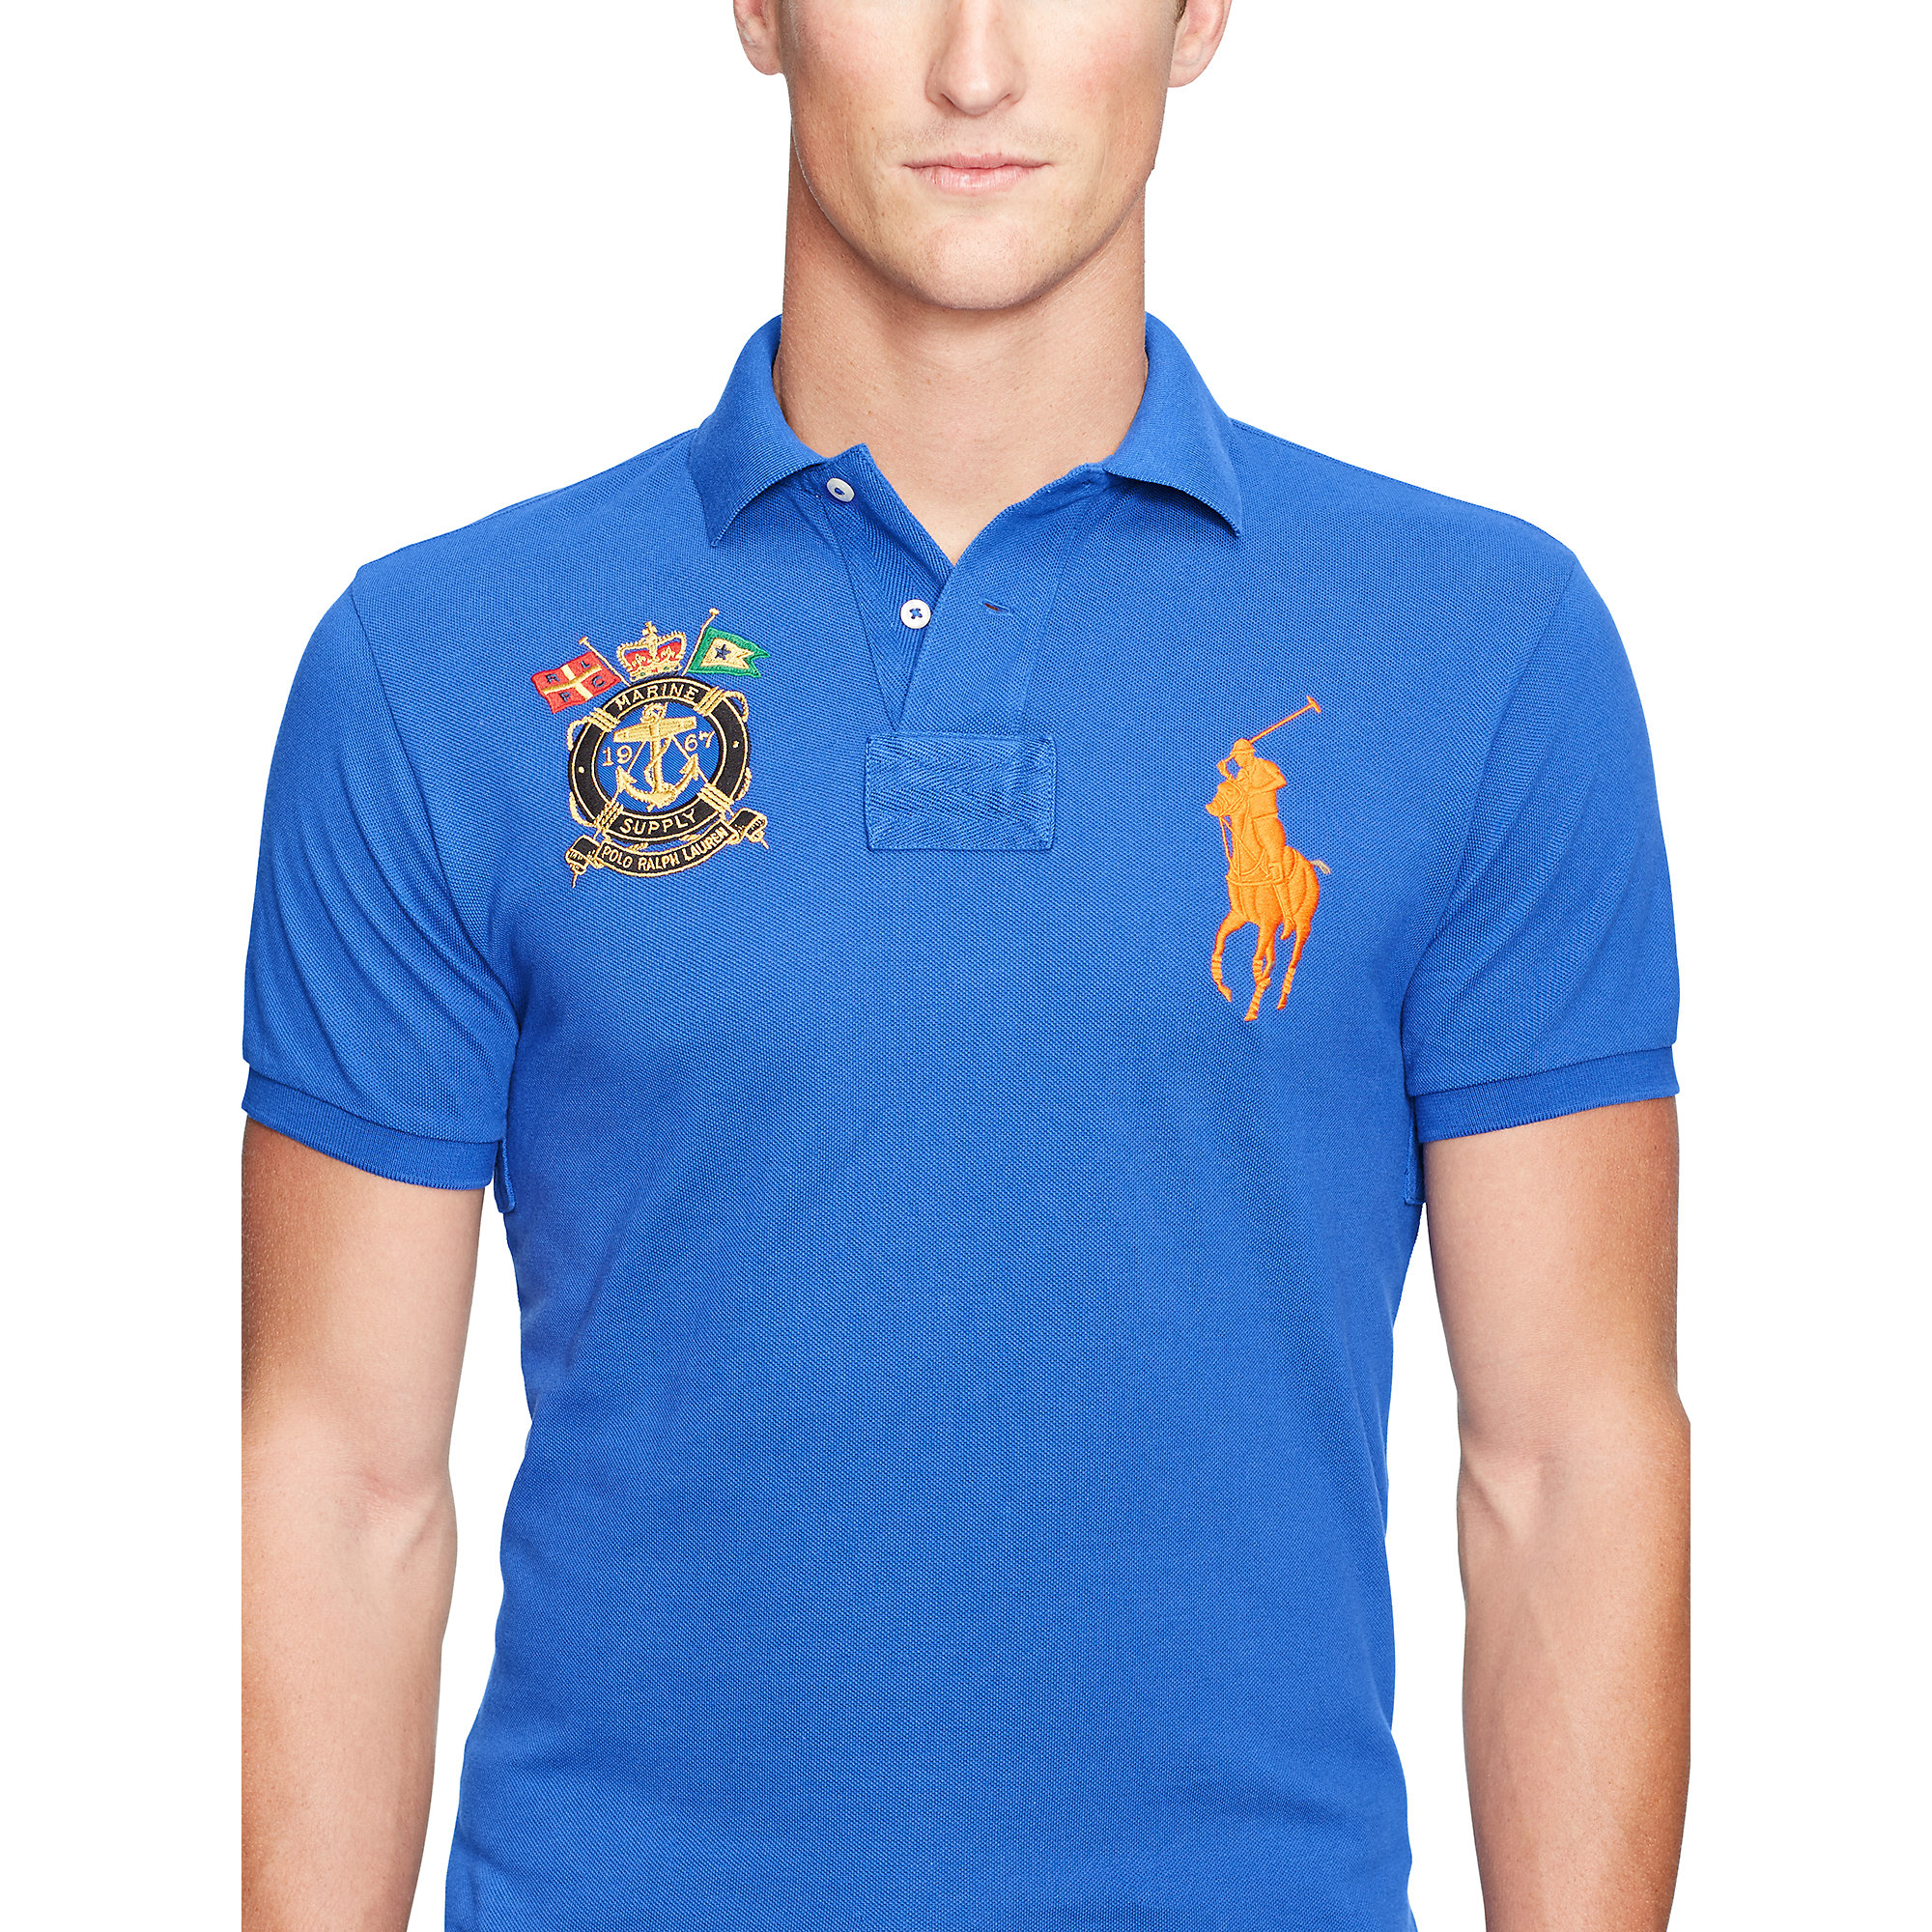 Lyst - Polo Ralph Lauren Custom-fit Big Pony Polo Shirt in Blue for Men